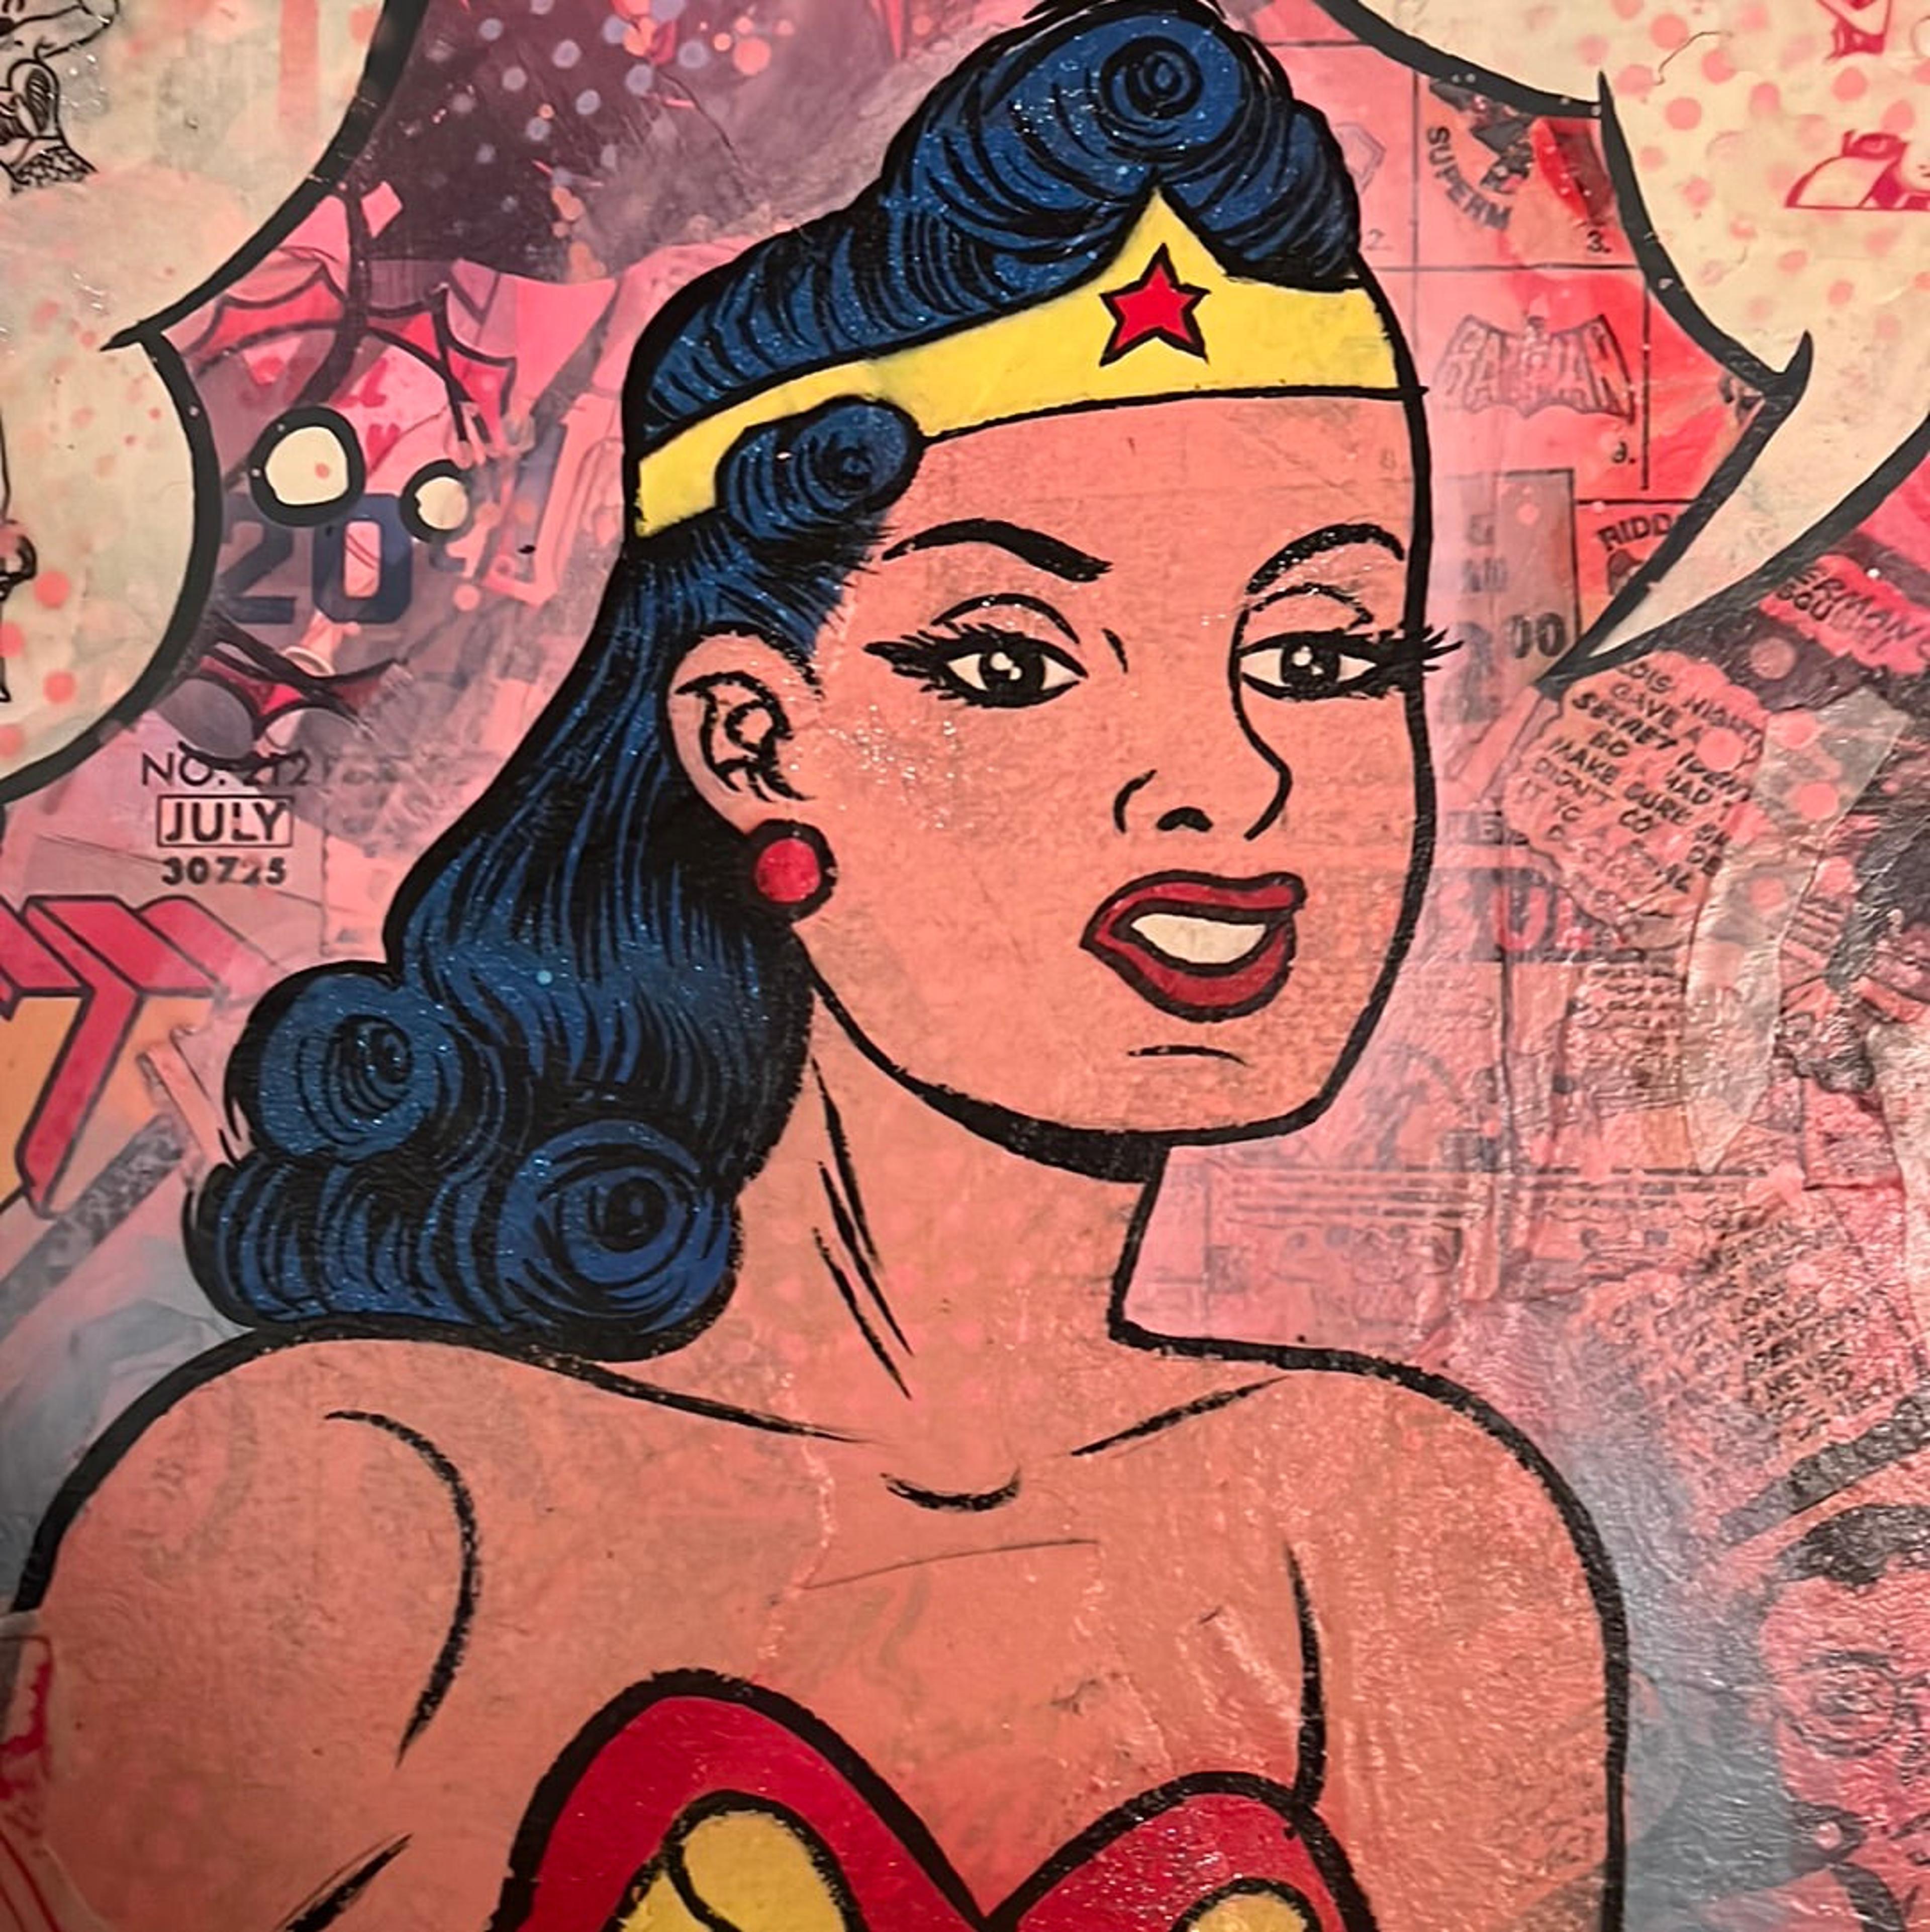 Alternate View 1 of "Wonder Woman Squared No. 1" original painting by Dr. Smash!  12